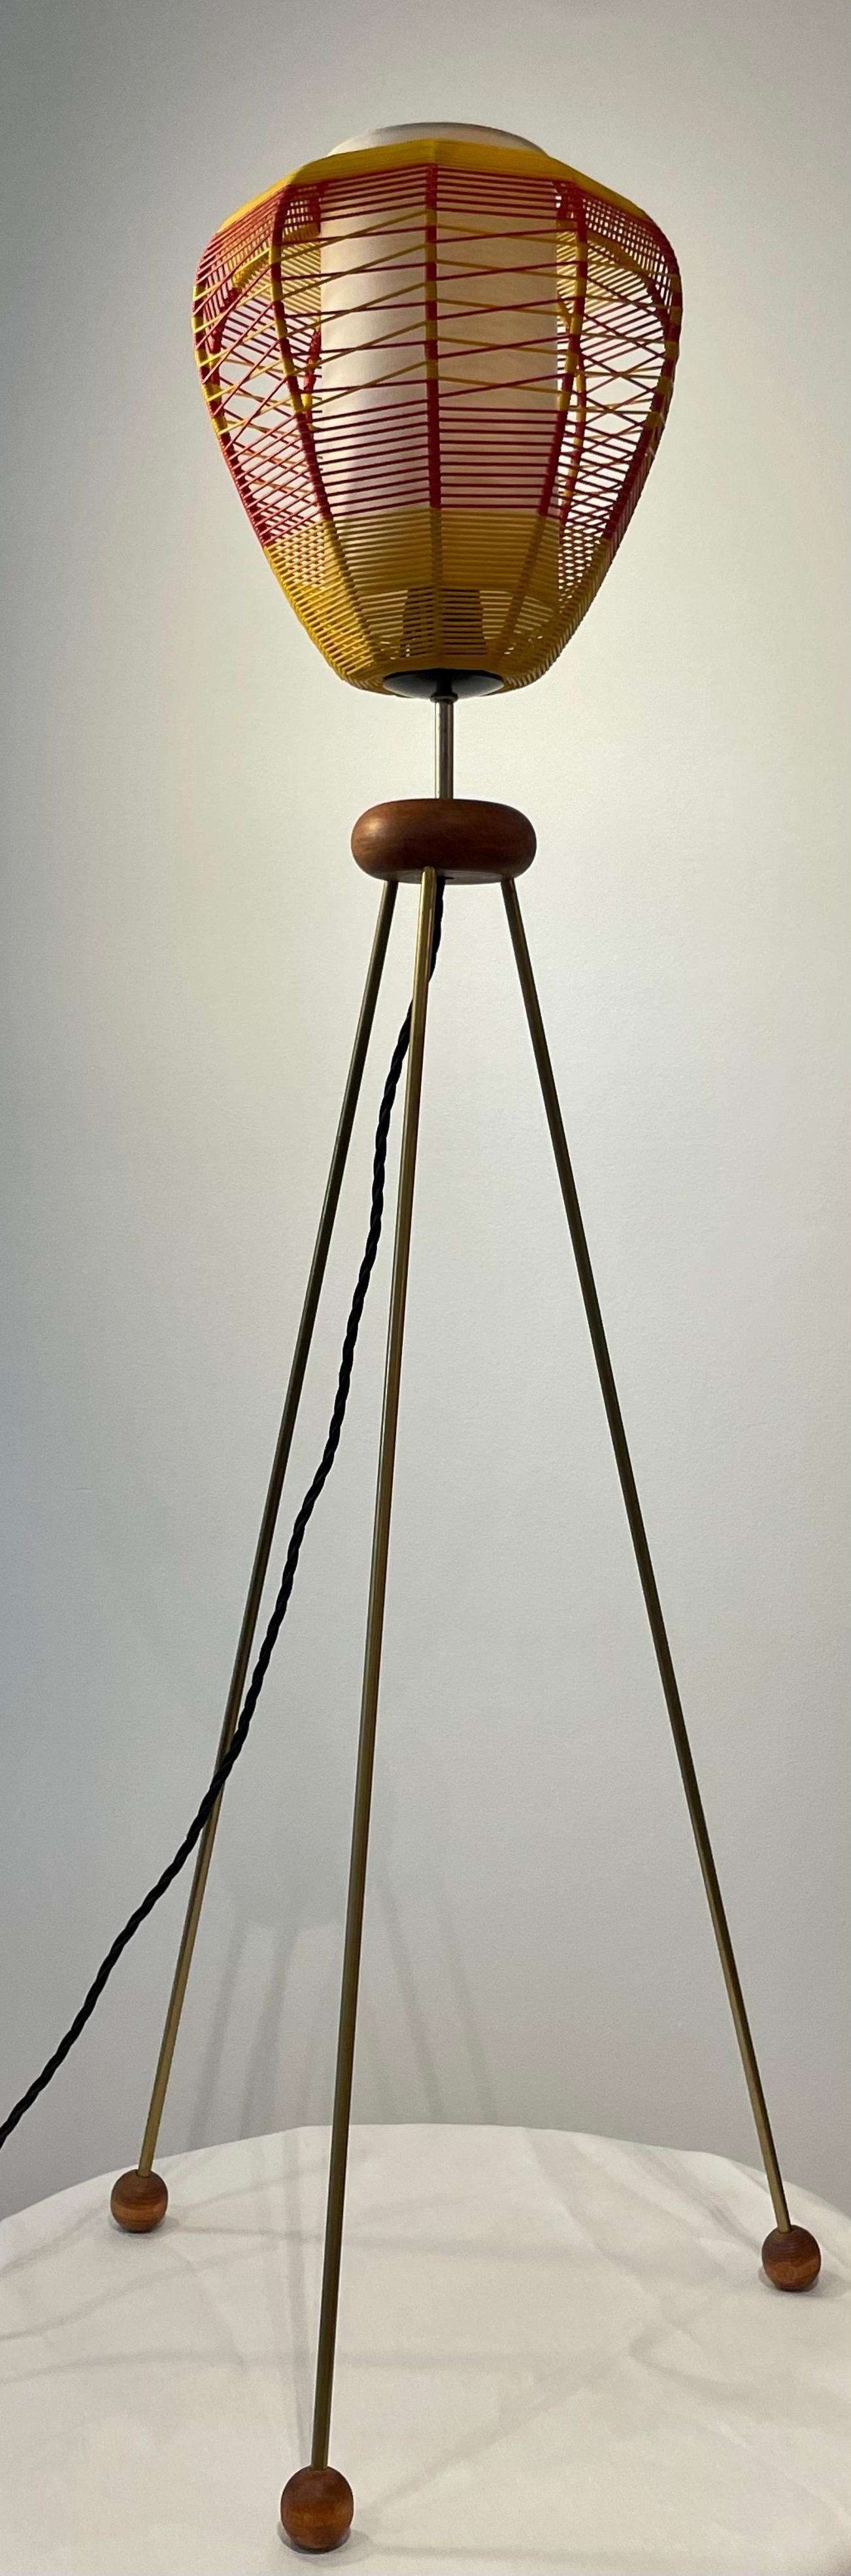 1950's Italian tripod lamp with whimsical red and yellow woven plastic shade encasing the light bulb. The metal legs form a tripod shape finished with ball feet for stability and Italian styling. 